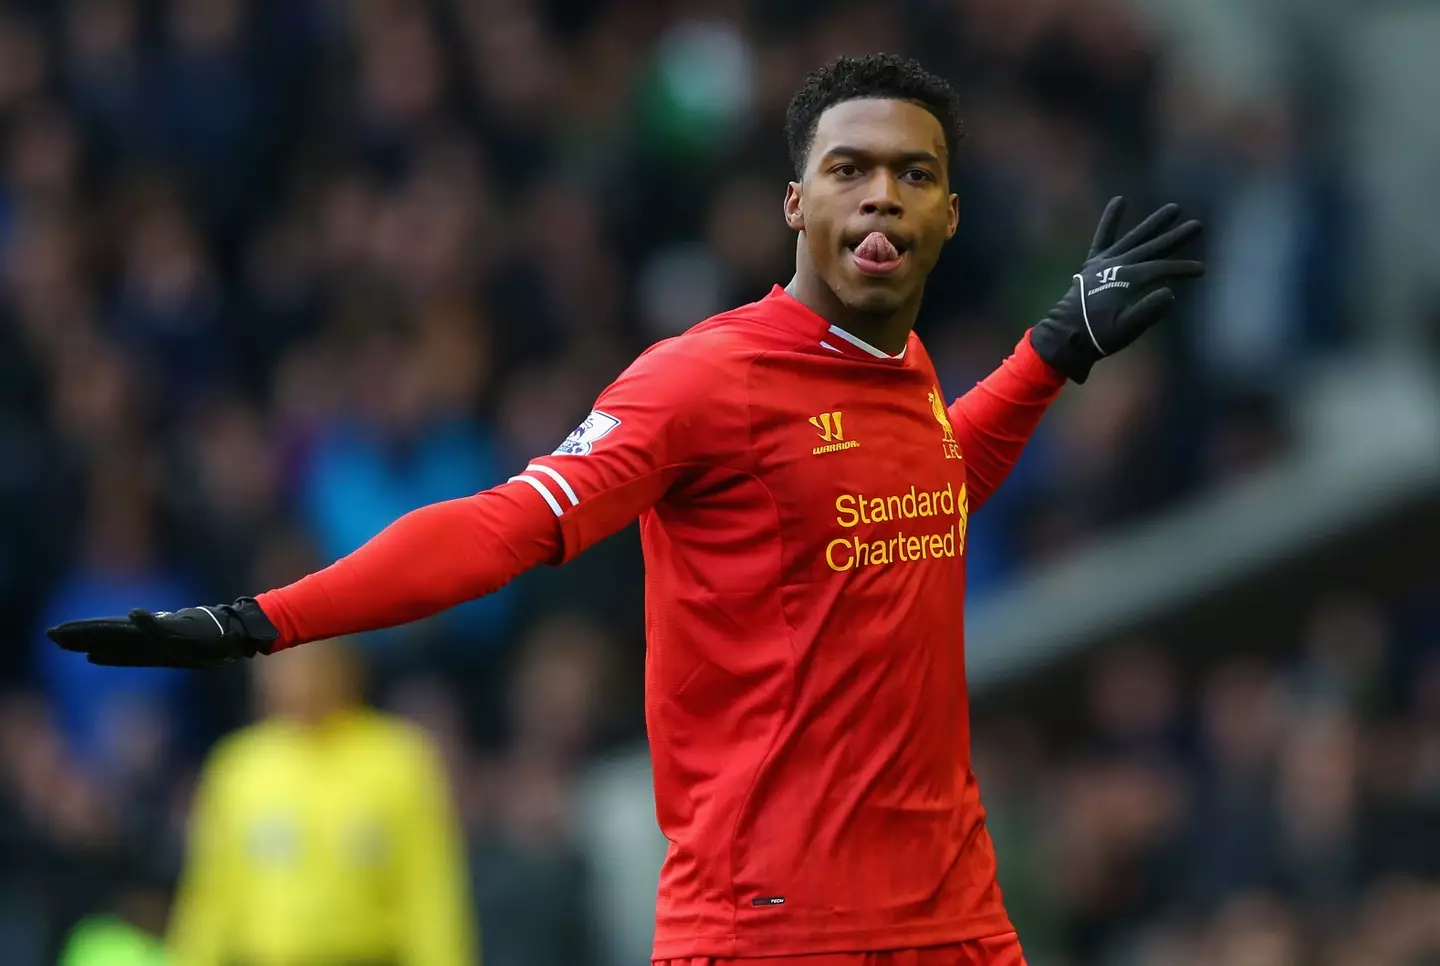 Sturridge scored 22 goals as Liverpool came close to winning their first league title since 1990. (Image